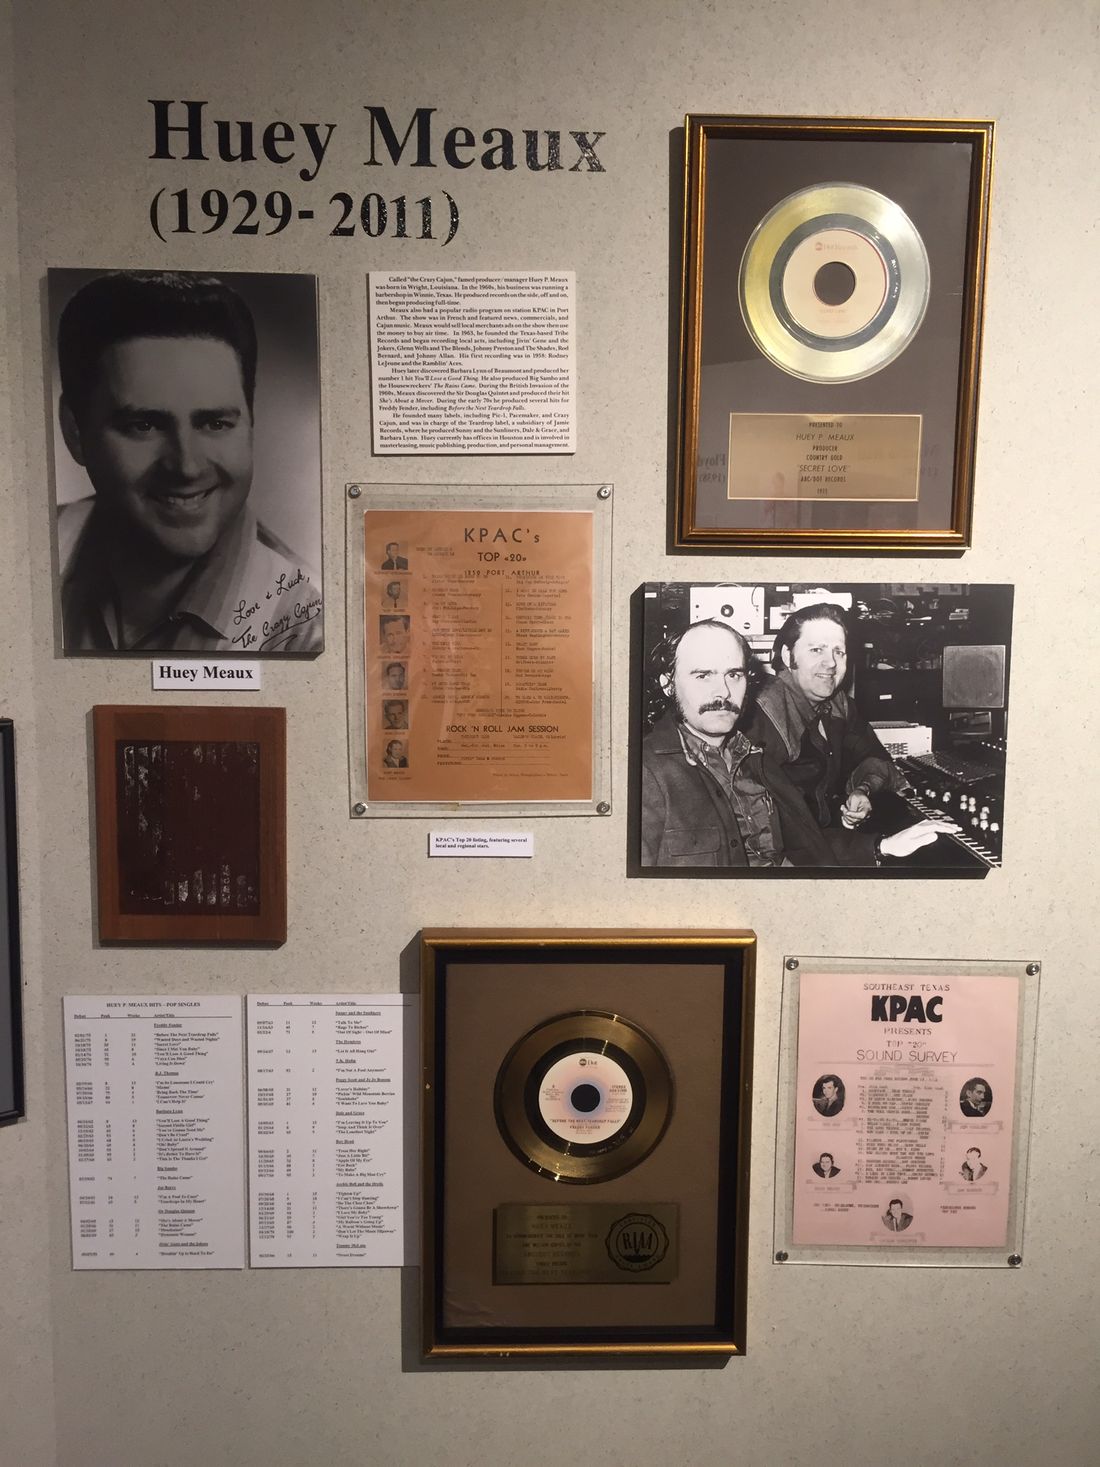 Huey Meaux - Record Producer and Music Publisher
